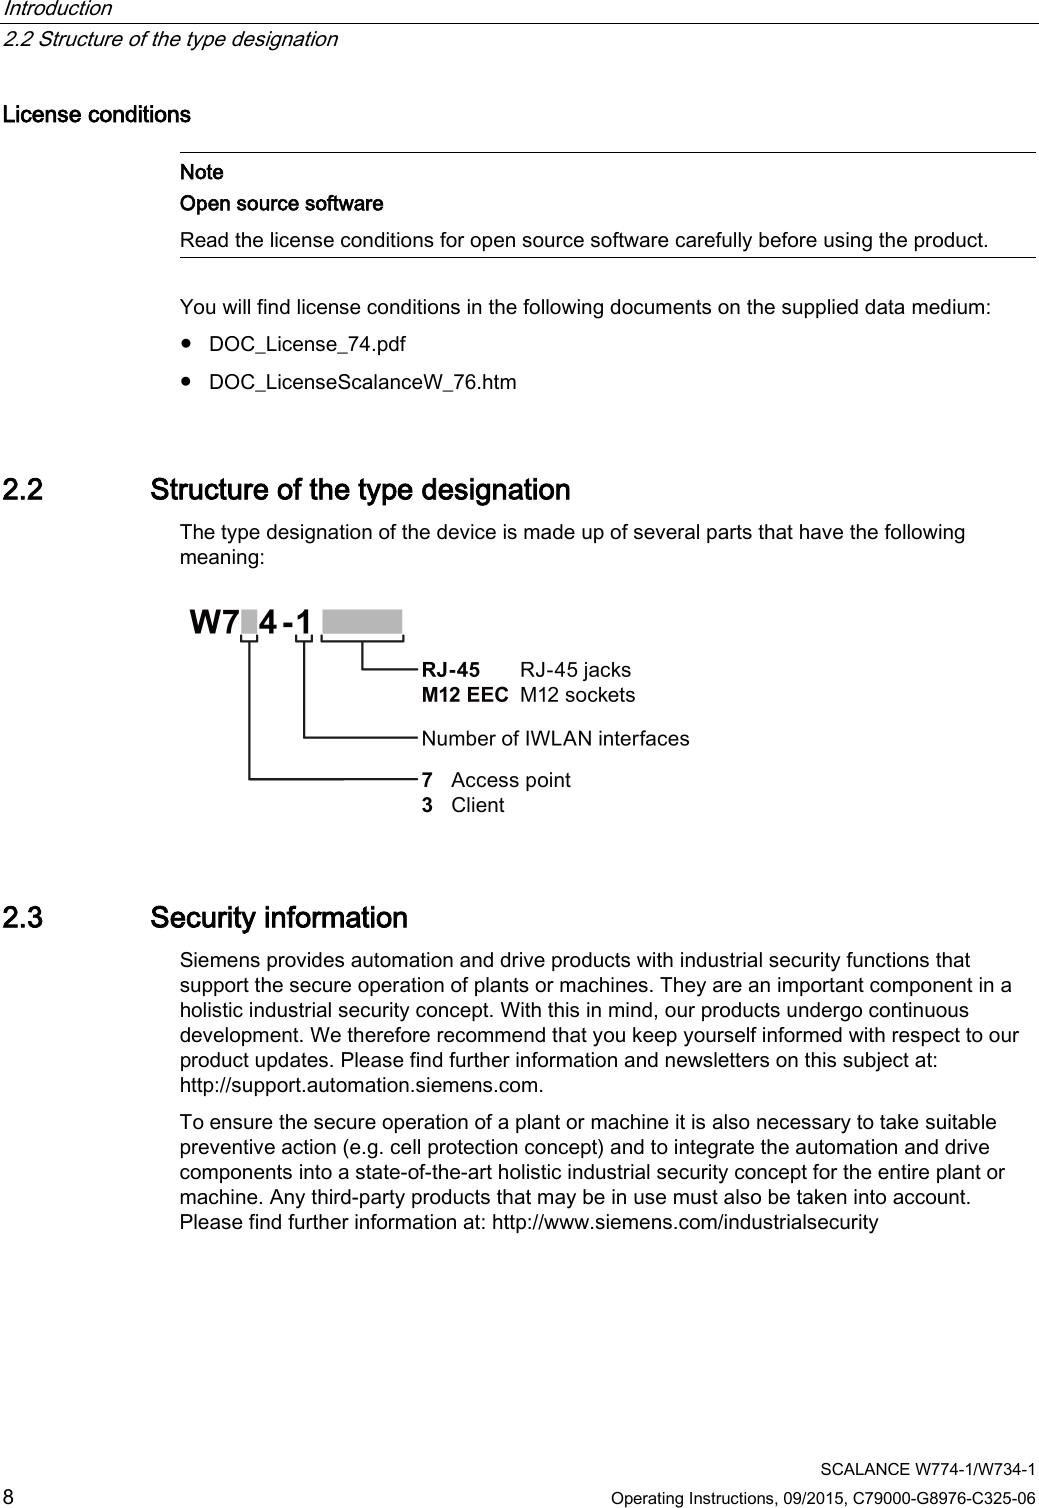 Introduction   2.2 Structure of the type designation  SCALANCE W774-1/W734-1 8 Operating Instructions, 09/2015, C79000-G8976-C325-06 License conditions   Note Open source software Read the license conditions for open source software carefully before using the product.  You will find license conditions in the following documents on the supplied data medium: ● DOC_License_74.pdf ● DOC_LicenseScalanceW_76.htm 2.2 Structure of the type designation The type designation of the device is made up of several parts that have the following meaning:  2.3 Security information Siemens provides automation and drive products with industrial security functions that support the secure operation of plants or machines. They are an important component in a holistic industrial security concept. With this in mind, our products undergo continuous development. We therefore recommend that you keep yourself informed with respect to our product updates. Please find further information and newsletters on this subject at: http://support.automation.siemens.com. To ensure the secure operation of a plant or machine it is also necessary to take suitable preventive action (e.g. cell protection concept) and to integrate the automation and drive components into a state-of-the-art holistic industrial security concept for the entire plant or machine. Any third-party products that may be in use must also be taken into account. Please find further information at: http://www.siemens.com/industrialsecurity 